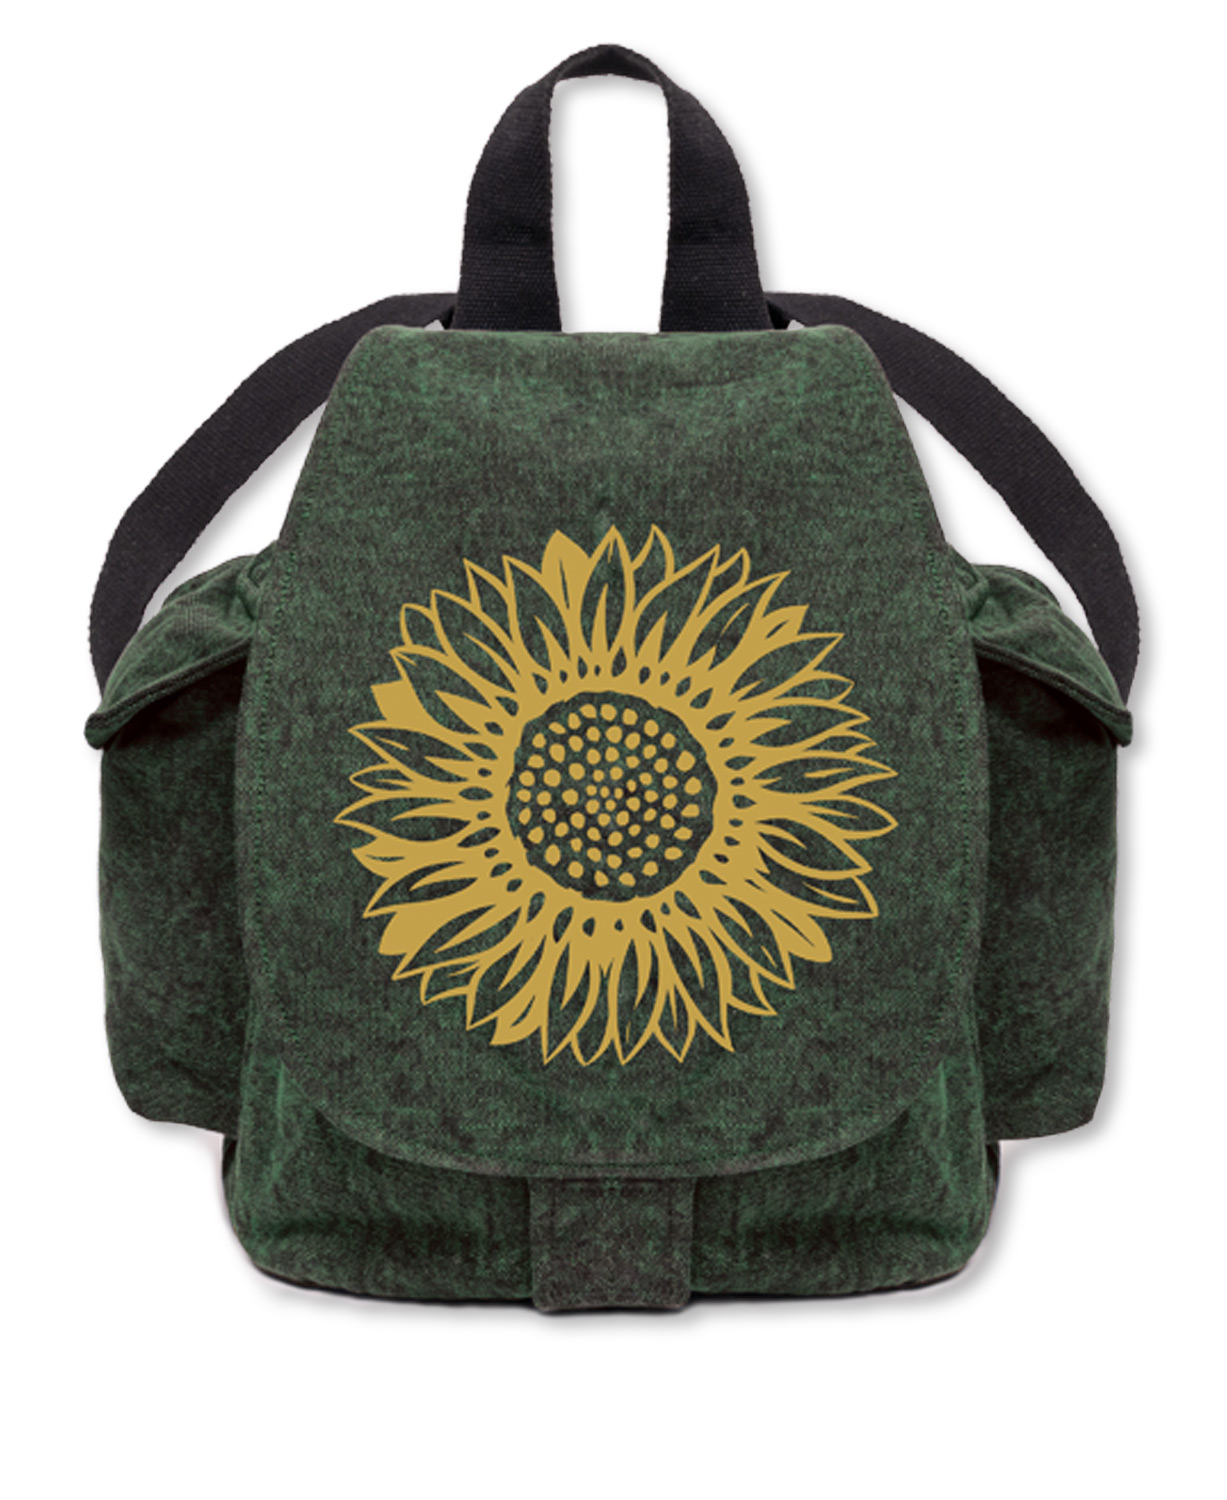 NEW! Sunflower Slouchy Backpack